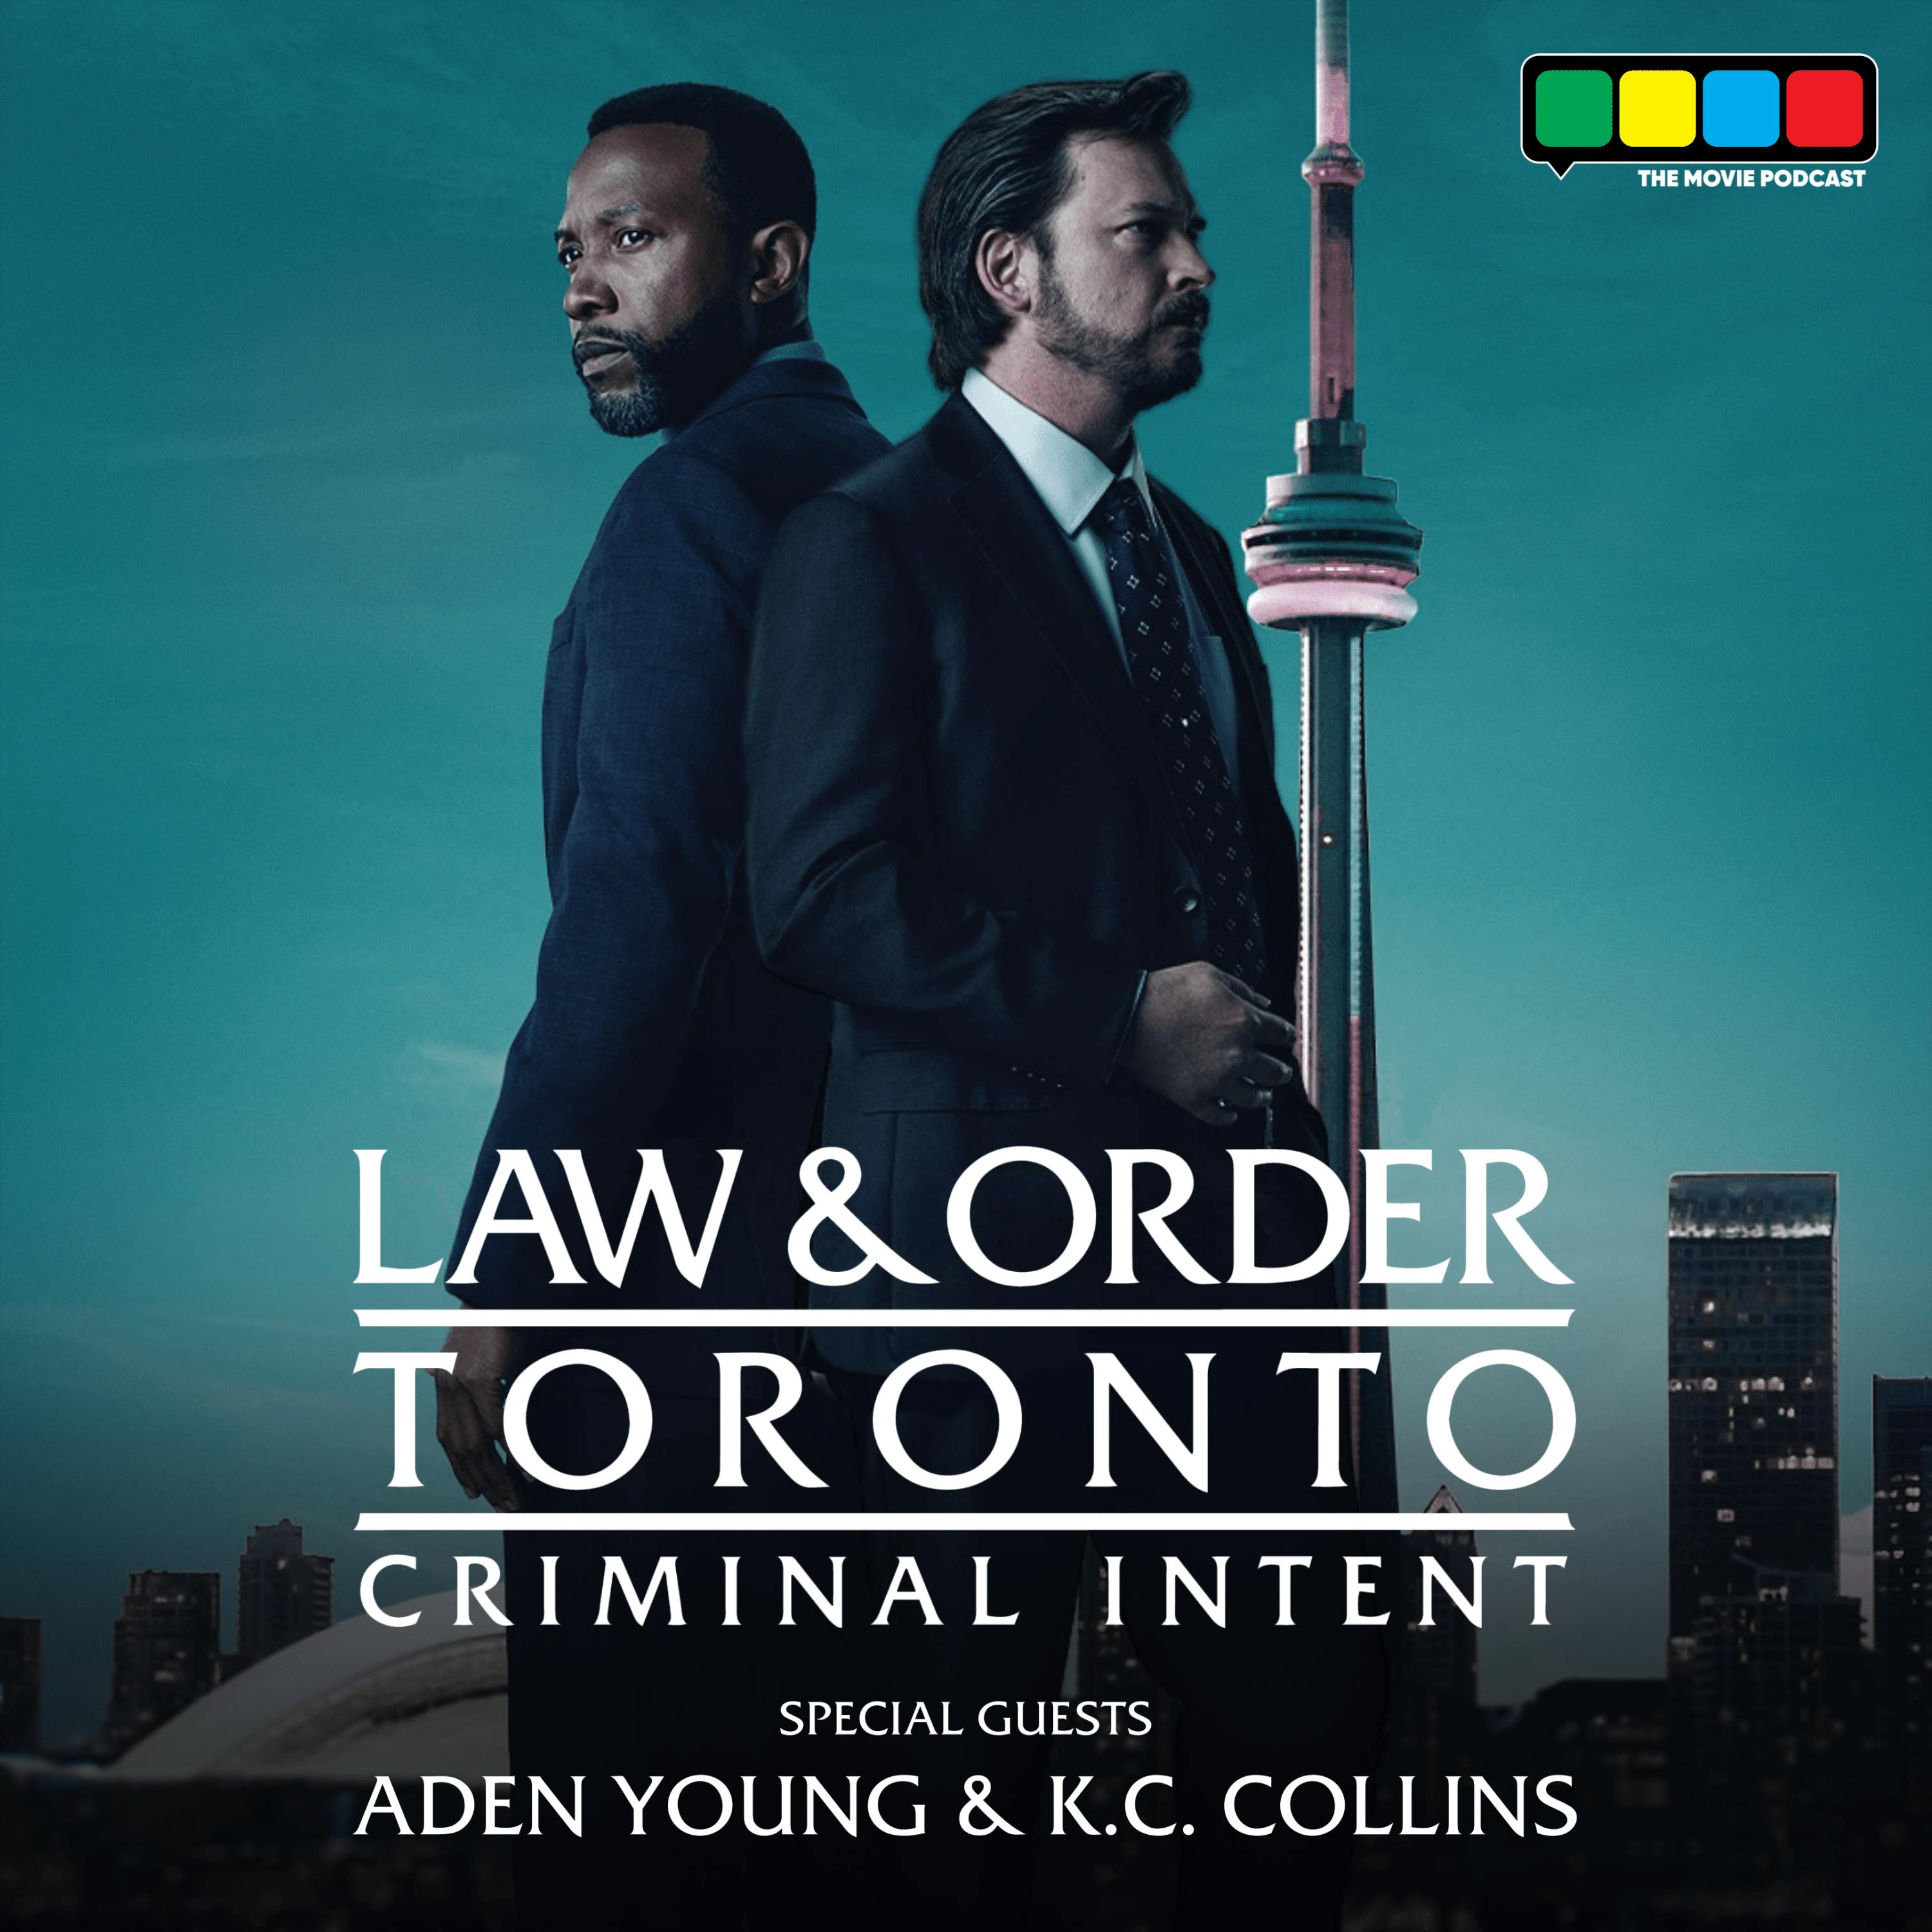 Law & Order Toronto: Criminal Intent Interview with Aden Young and K.C. Collins